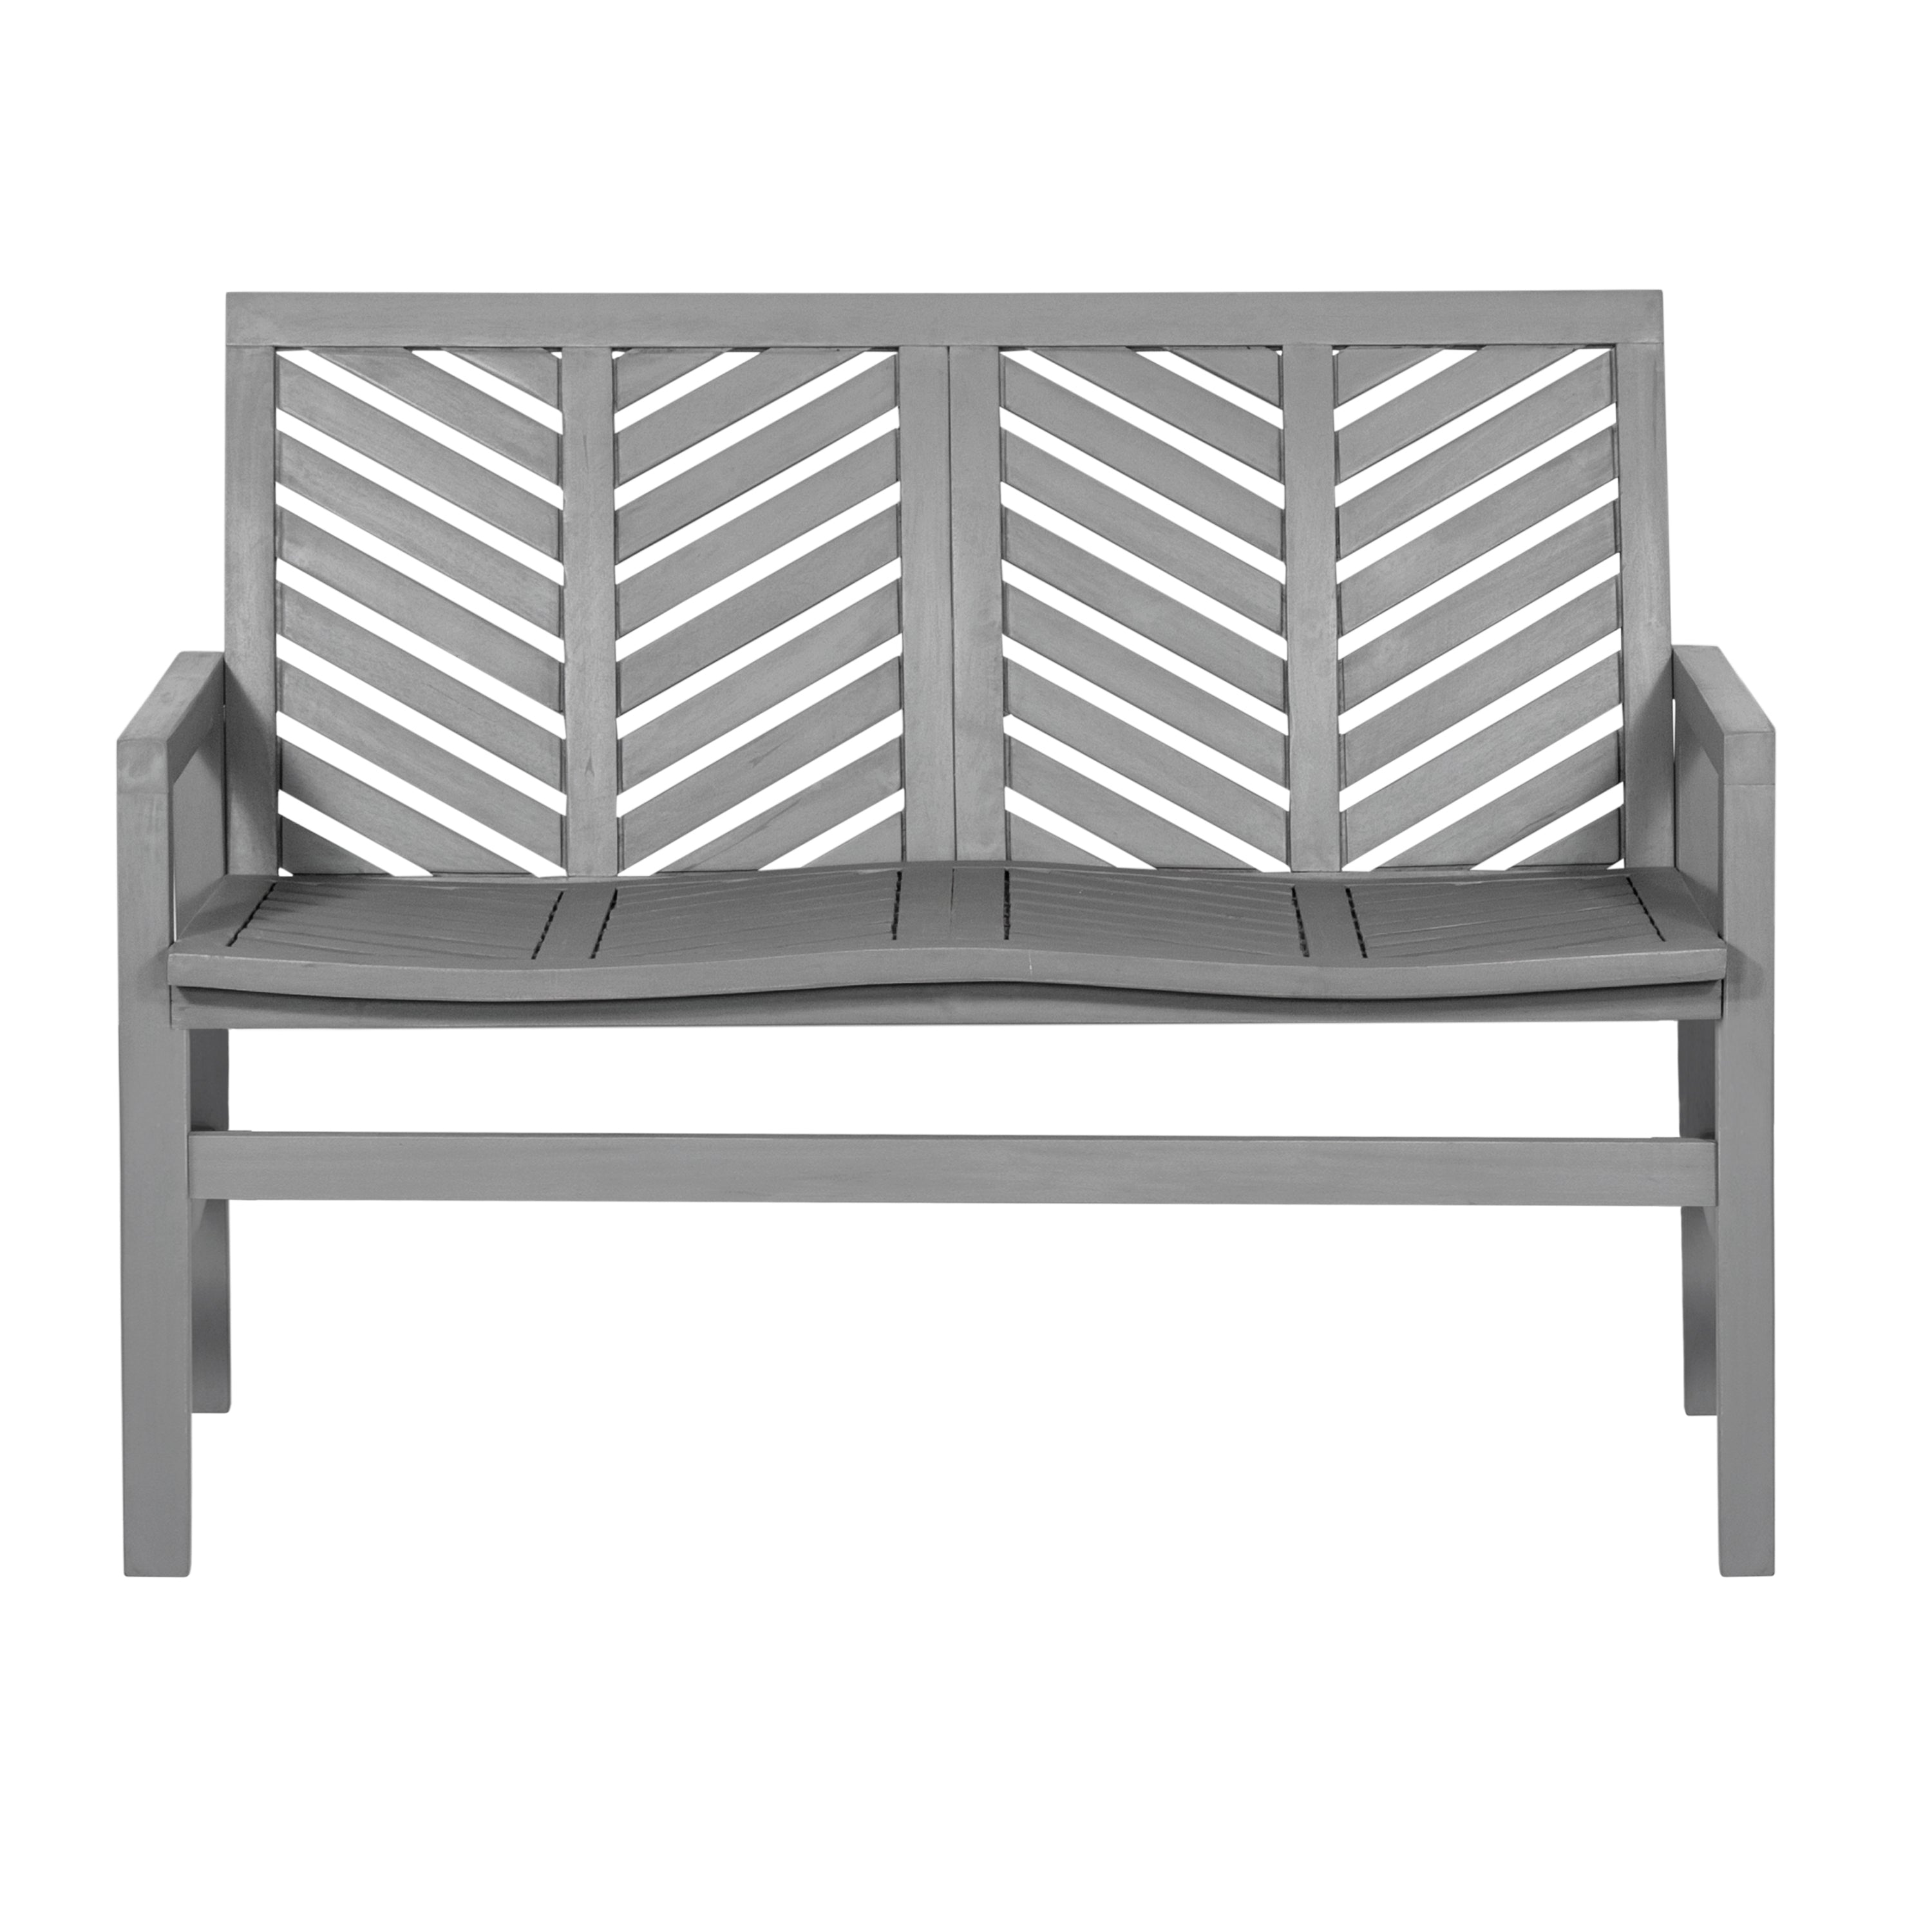 Vincent 48" Patio Wood Loveseat Bench - East Shore Modern Home Furnishings